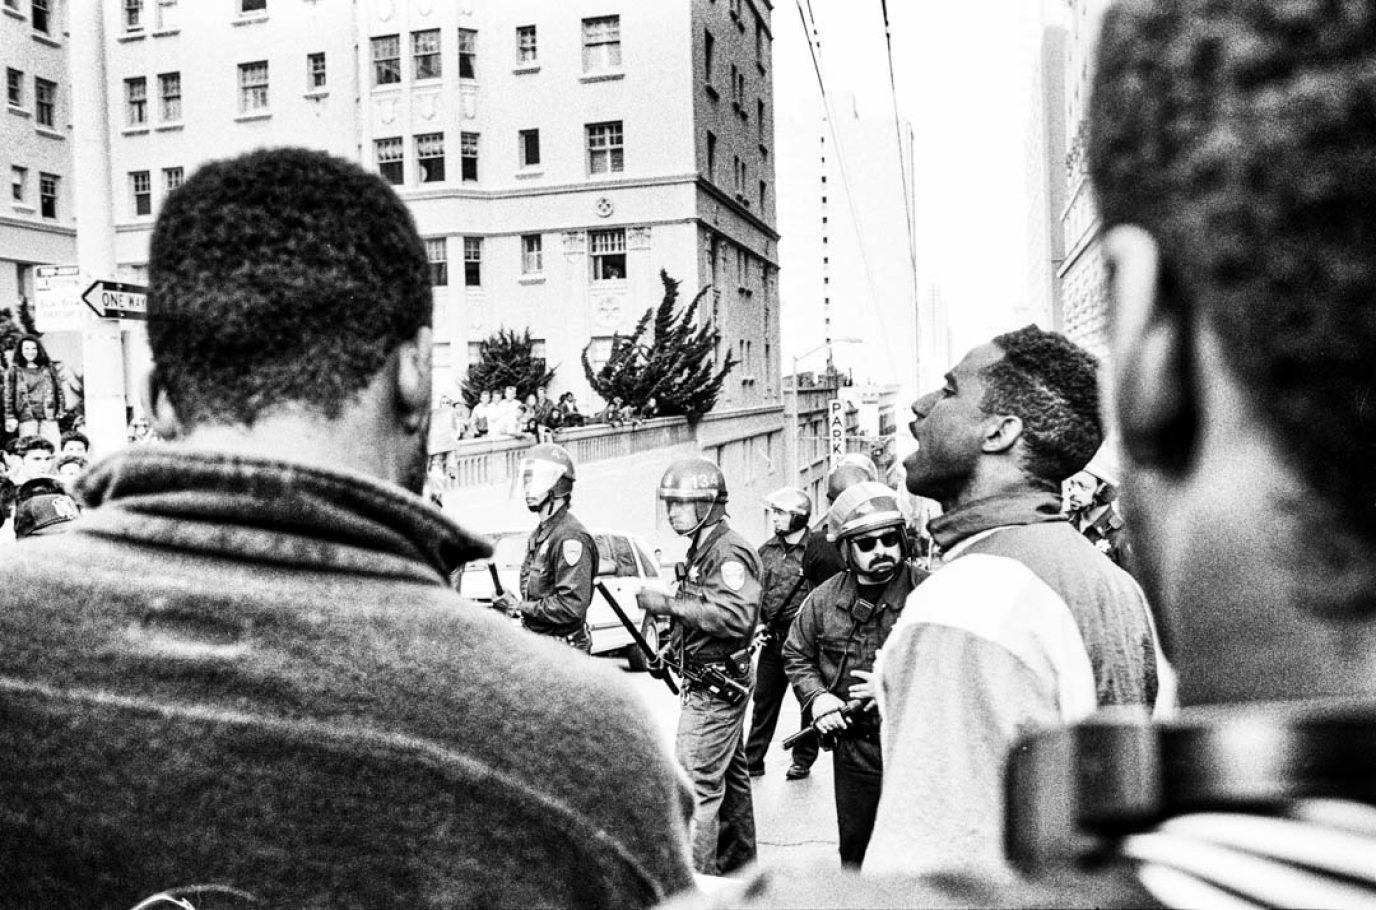 Reaction to acquittal of Los Angeles policemen involved in Rodney King beating, San Francisco, 1992